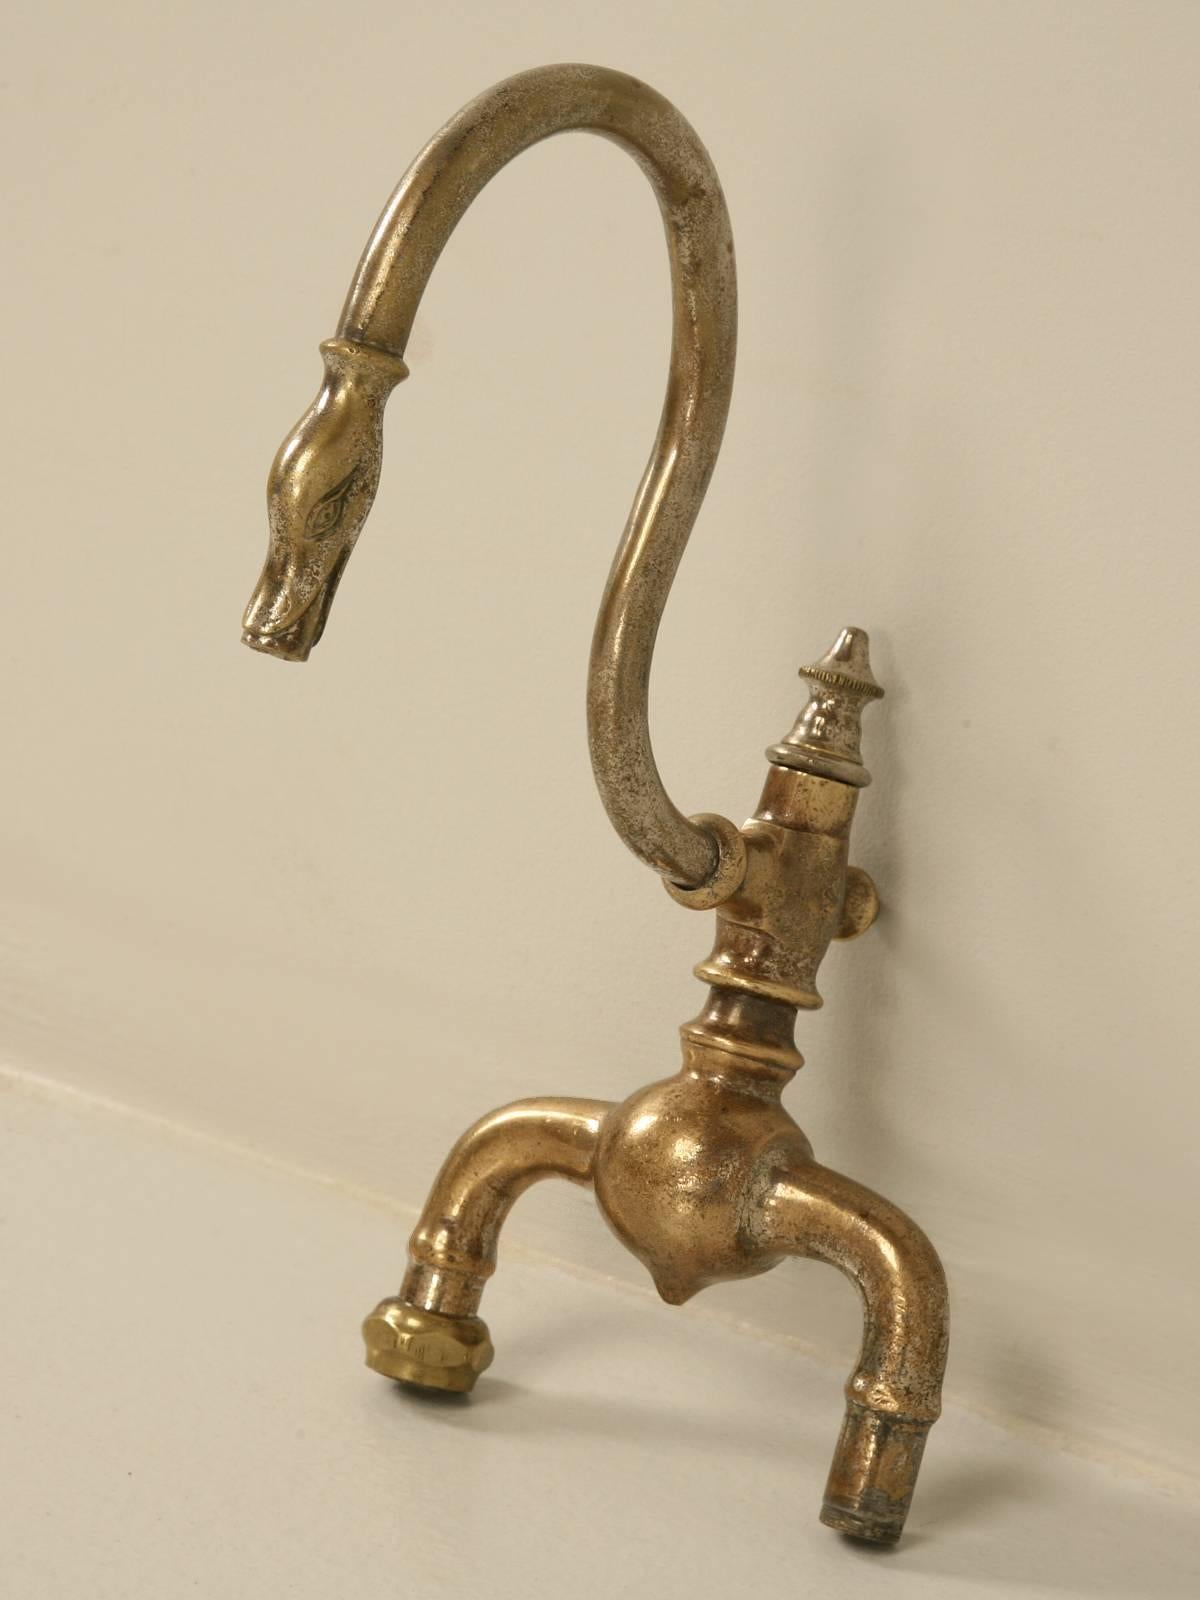 Antique French swan neck faucet in solid brass with a mostly worn off chrome finish. And before you ask, no we did not try to use it, so you have to assume it will require new gaskets.